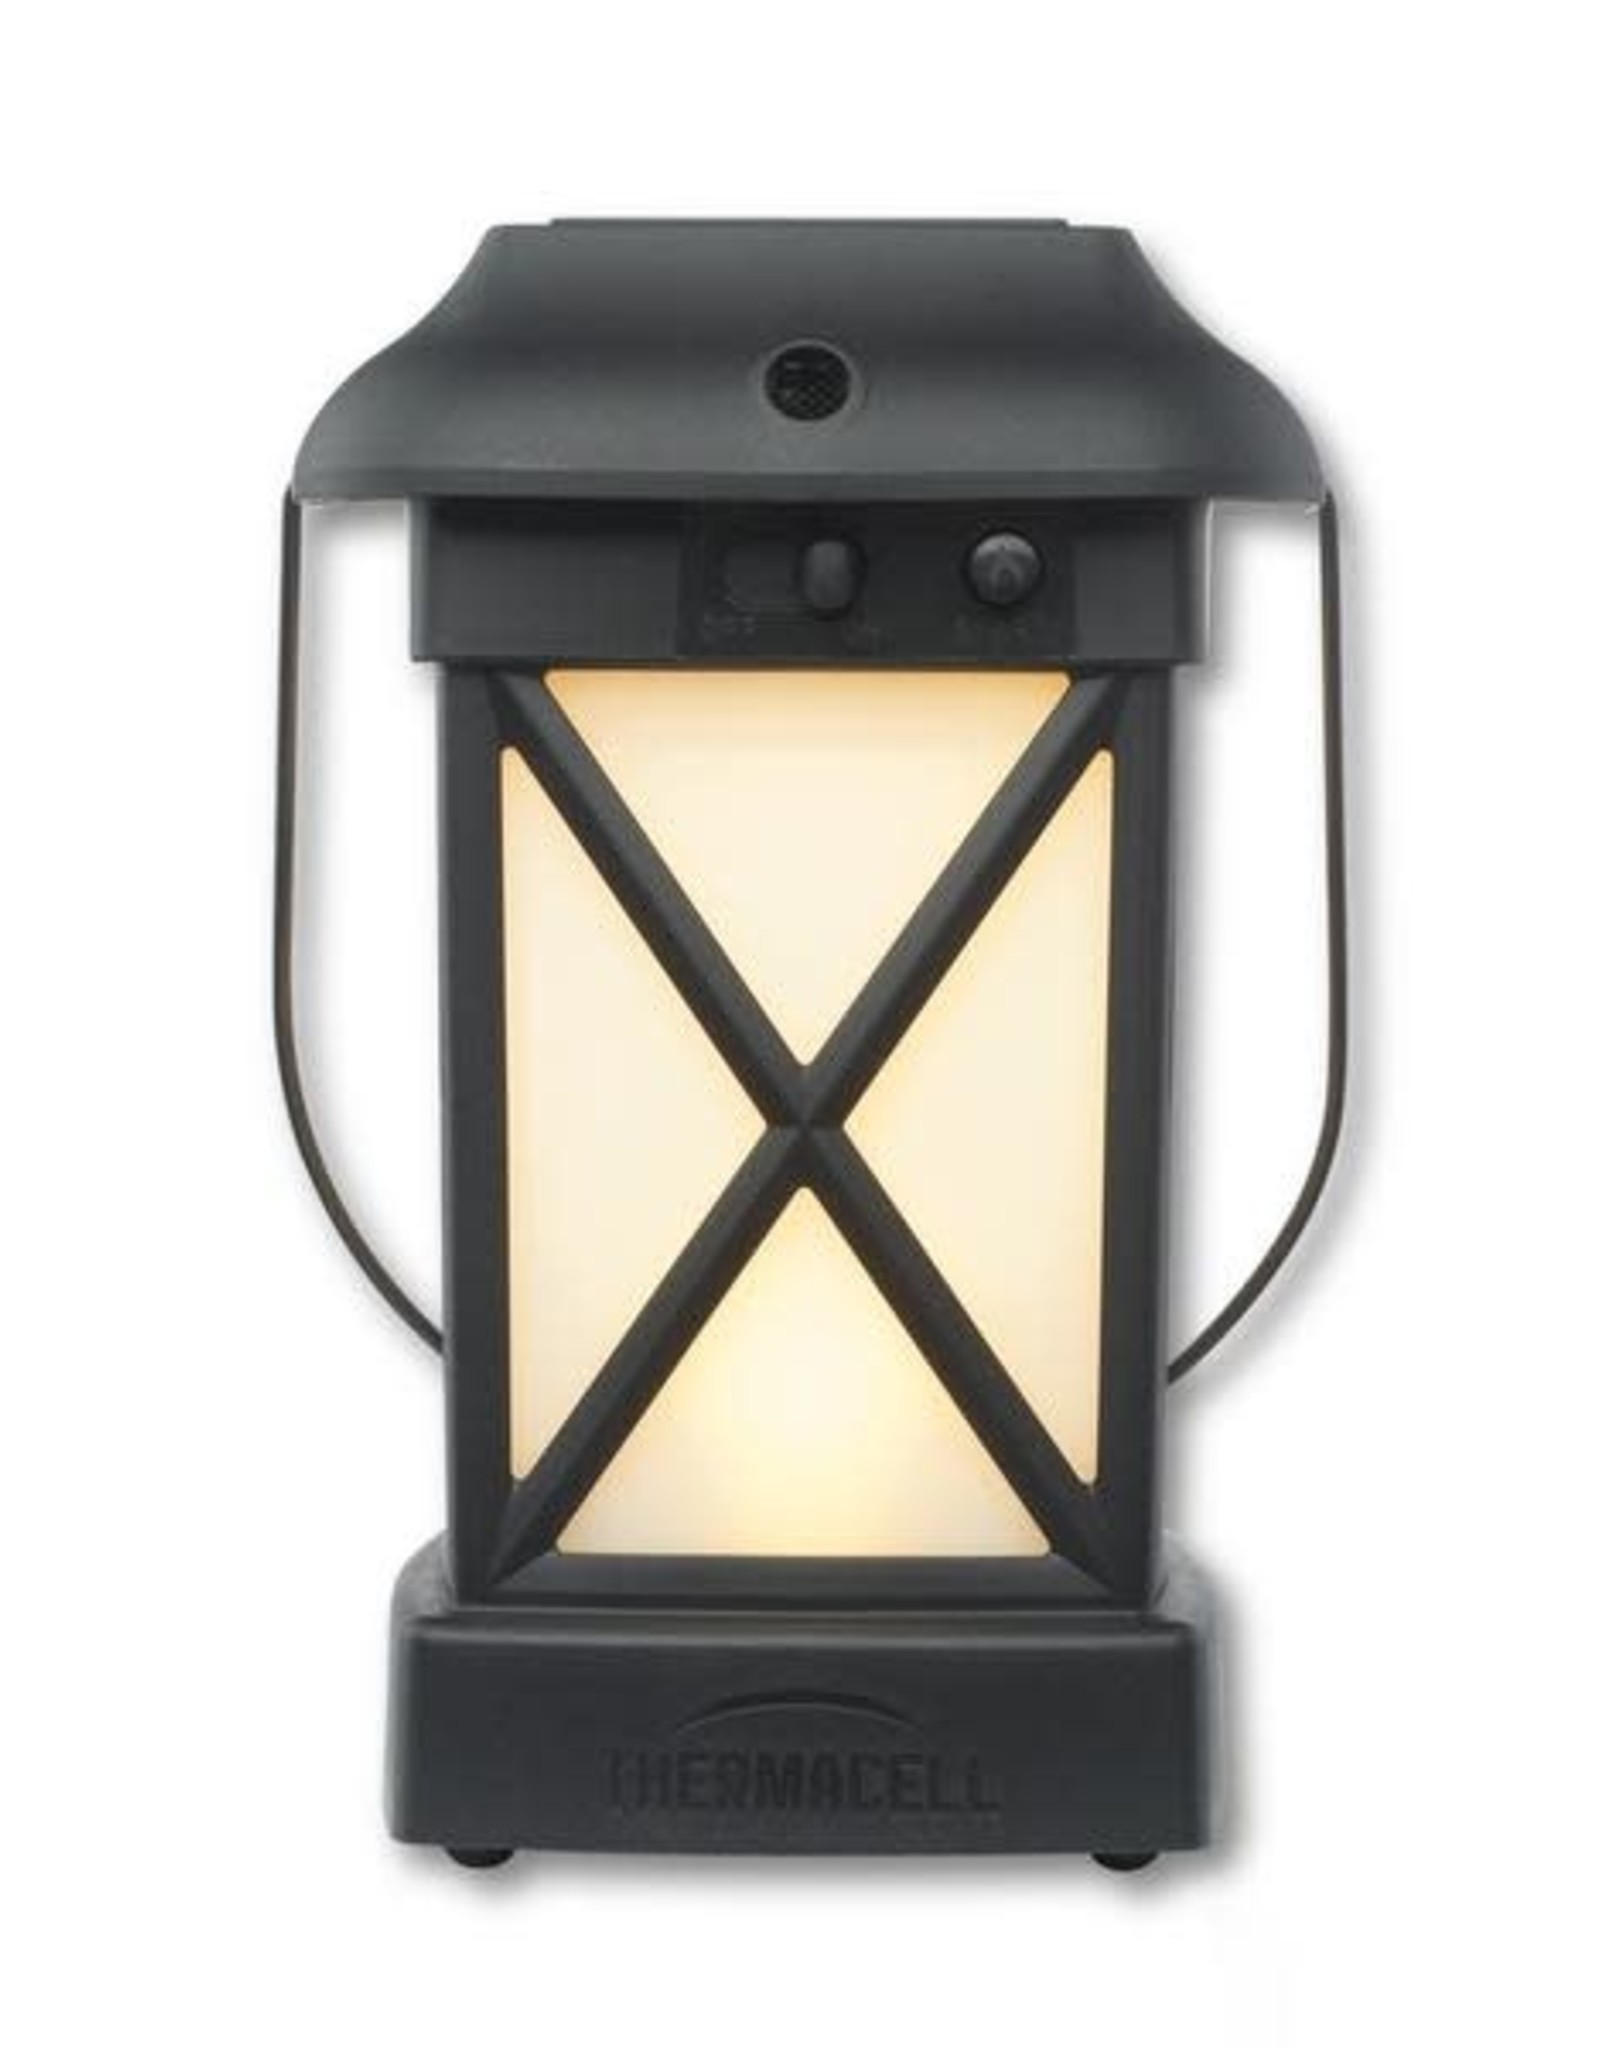 thermacell Thermacell Patio Shield Cambridge Lantern